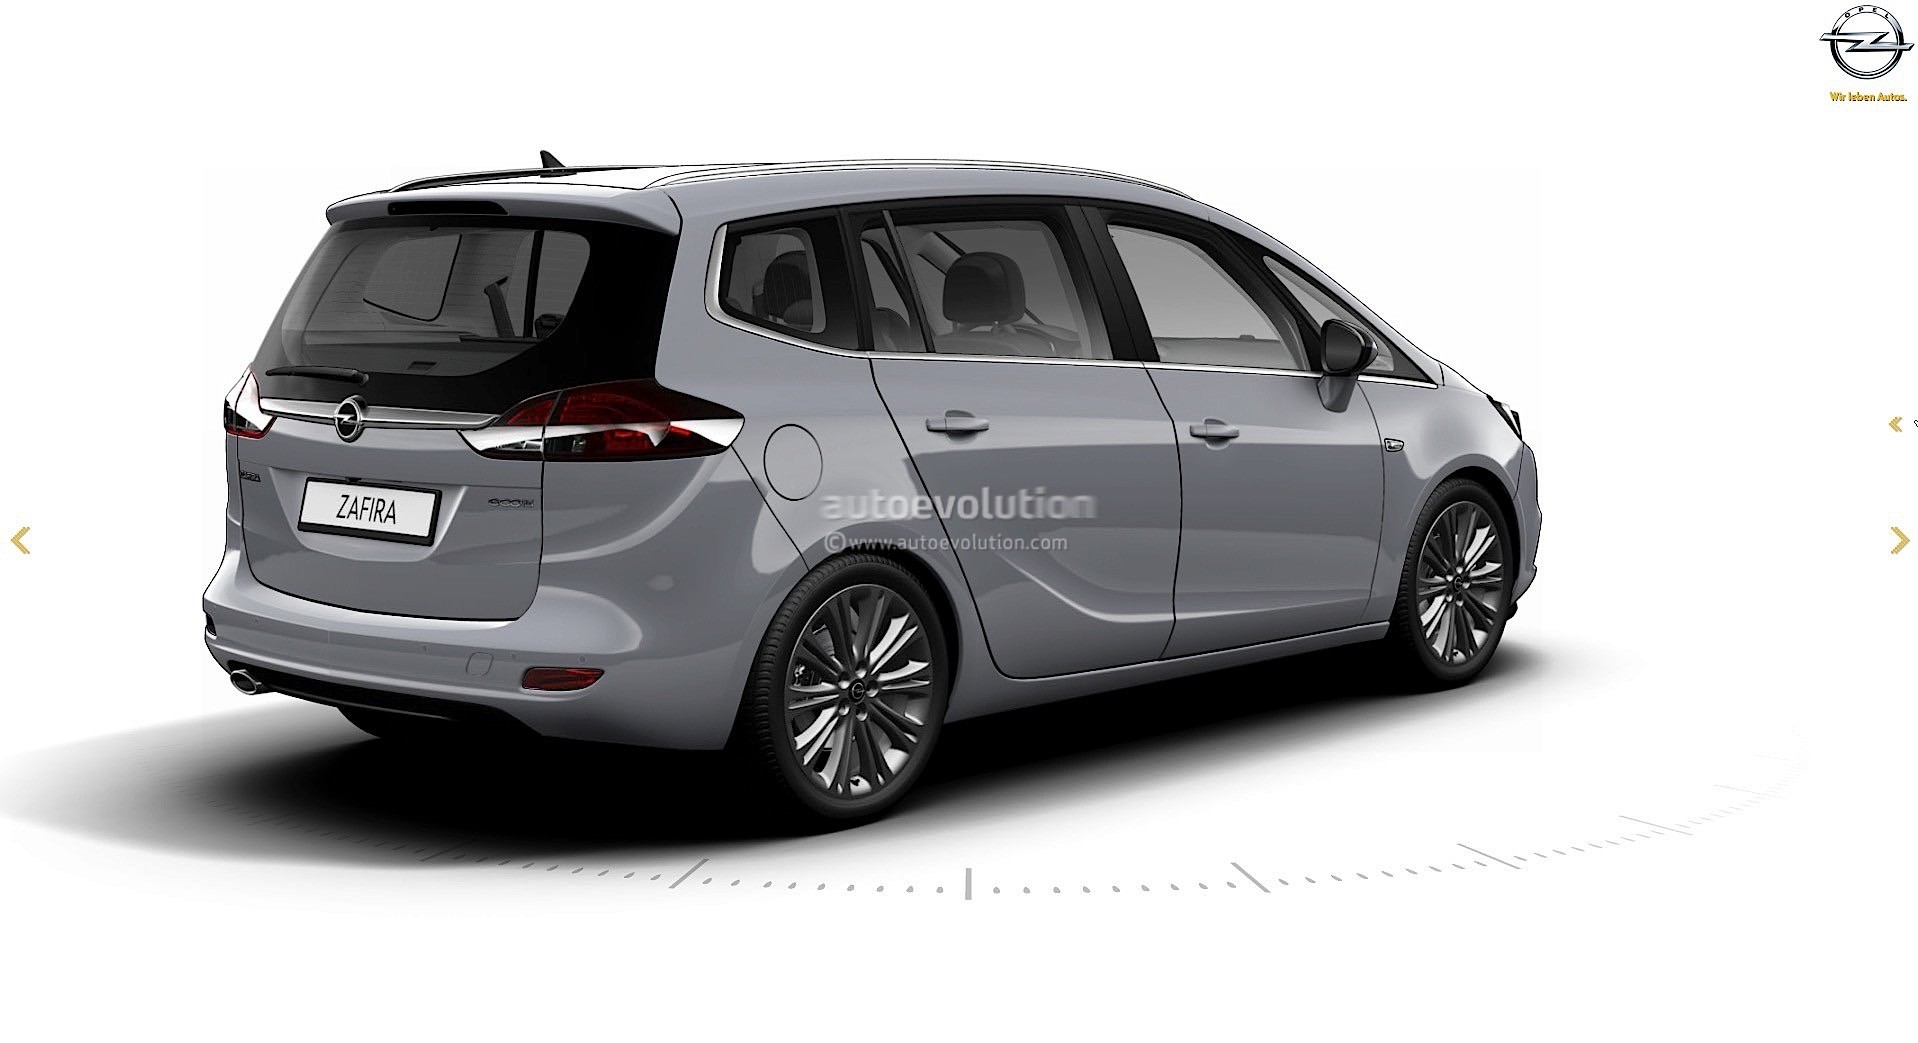 2017-opel-zafira-facelift-leaked-on-gm-website-here-are-the-first-pics_8-autonovosti.me-7